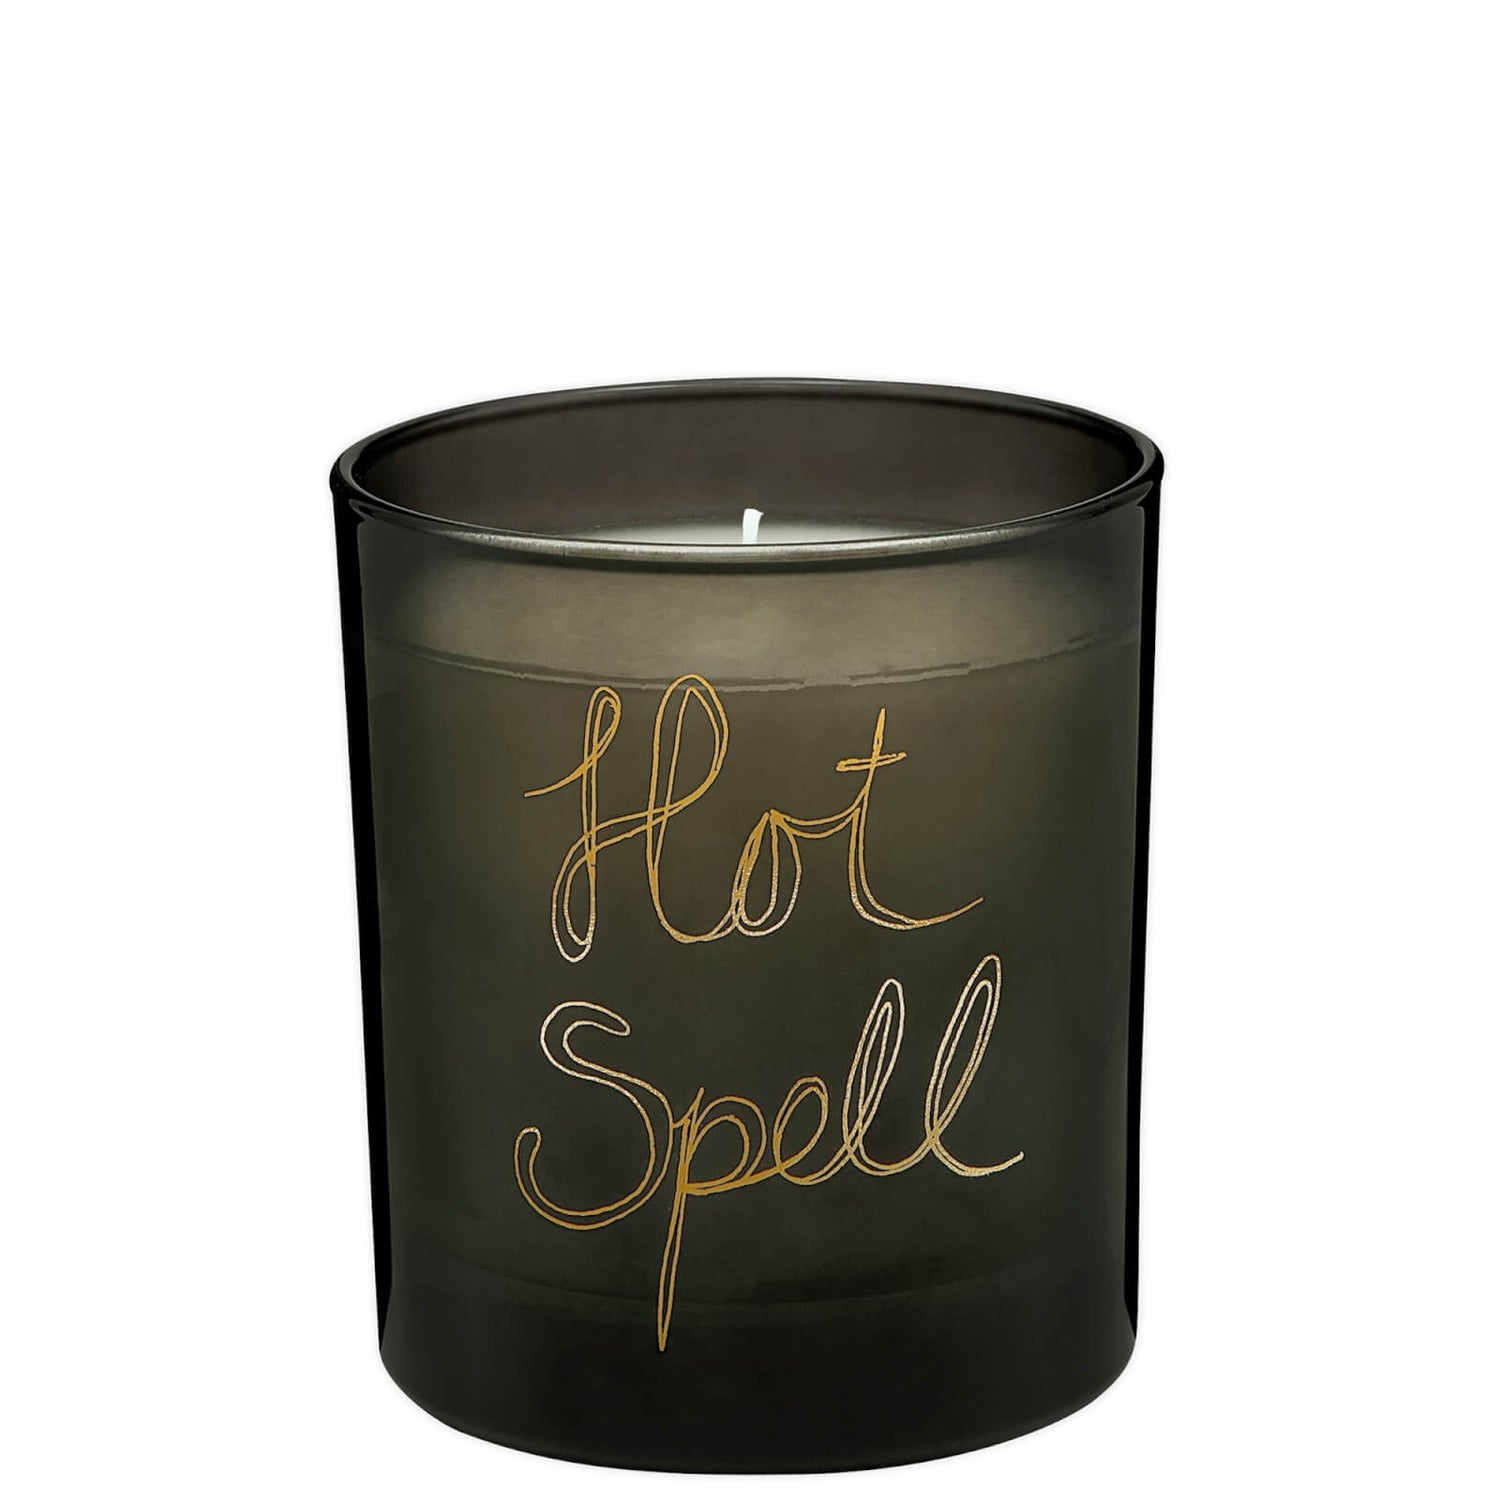 Bella Freud Hot Spell Candle 200g